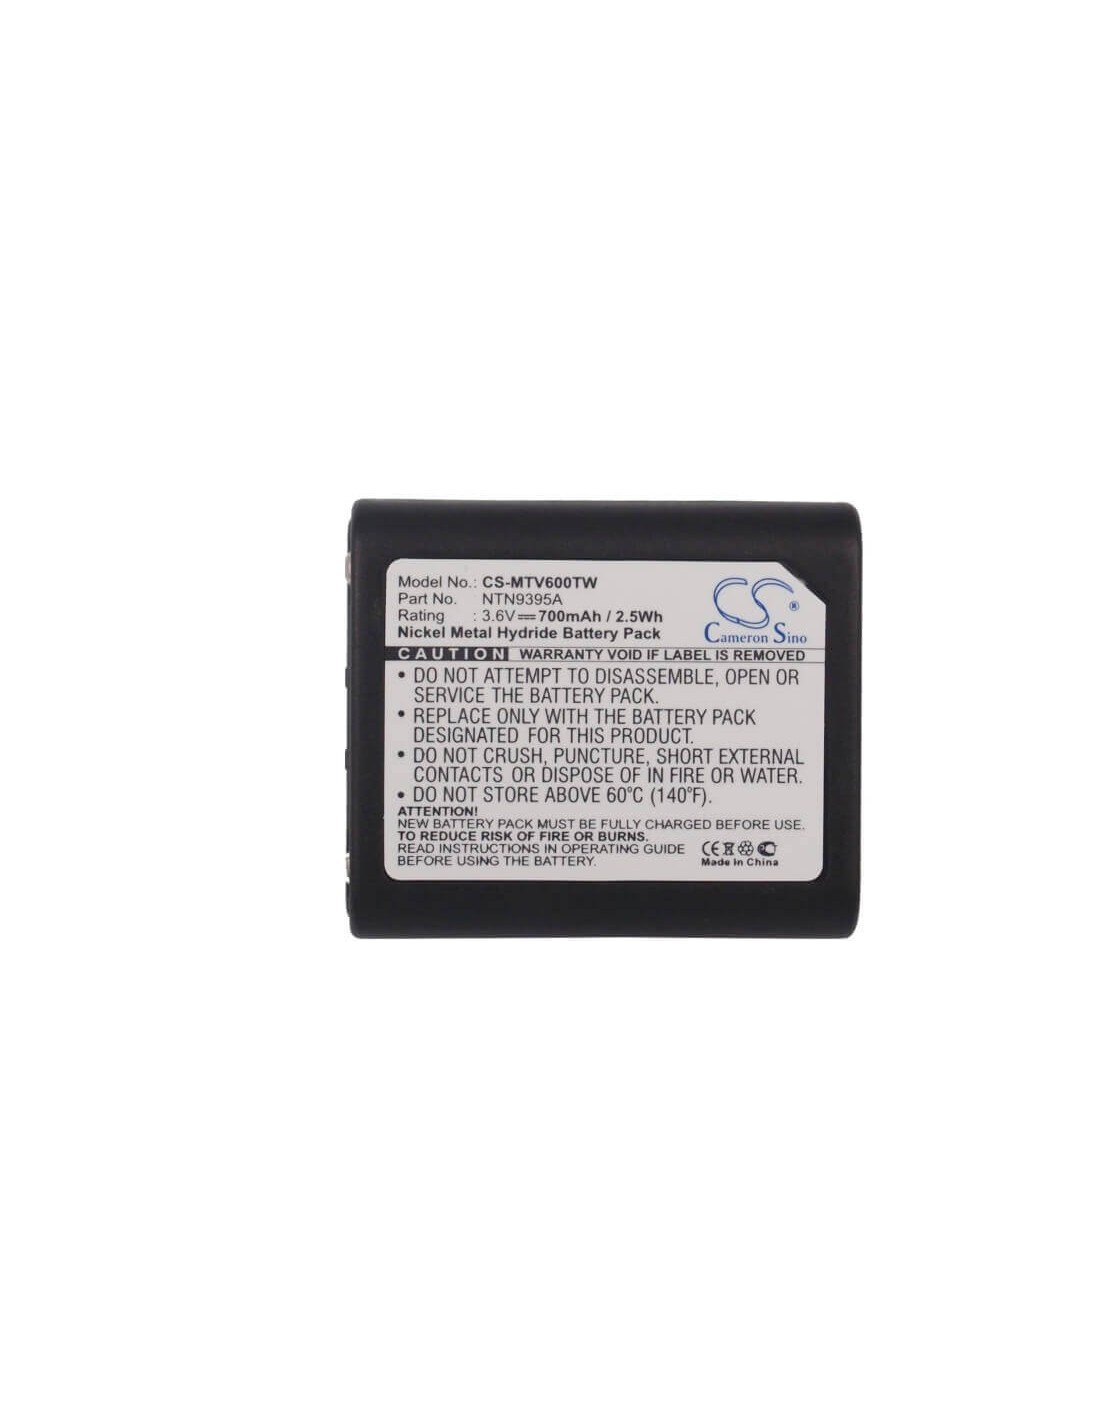 Battery for Motorola Talkabout T6000, Talkabout T6200, Talkabout T6210 3.6V, 700mAh - 2.52Wh